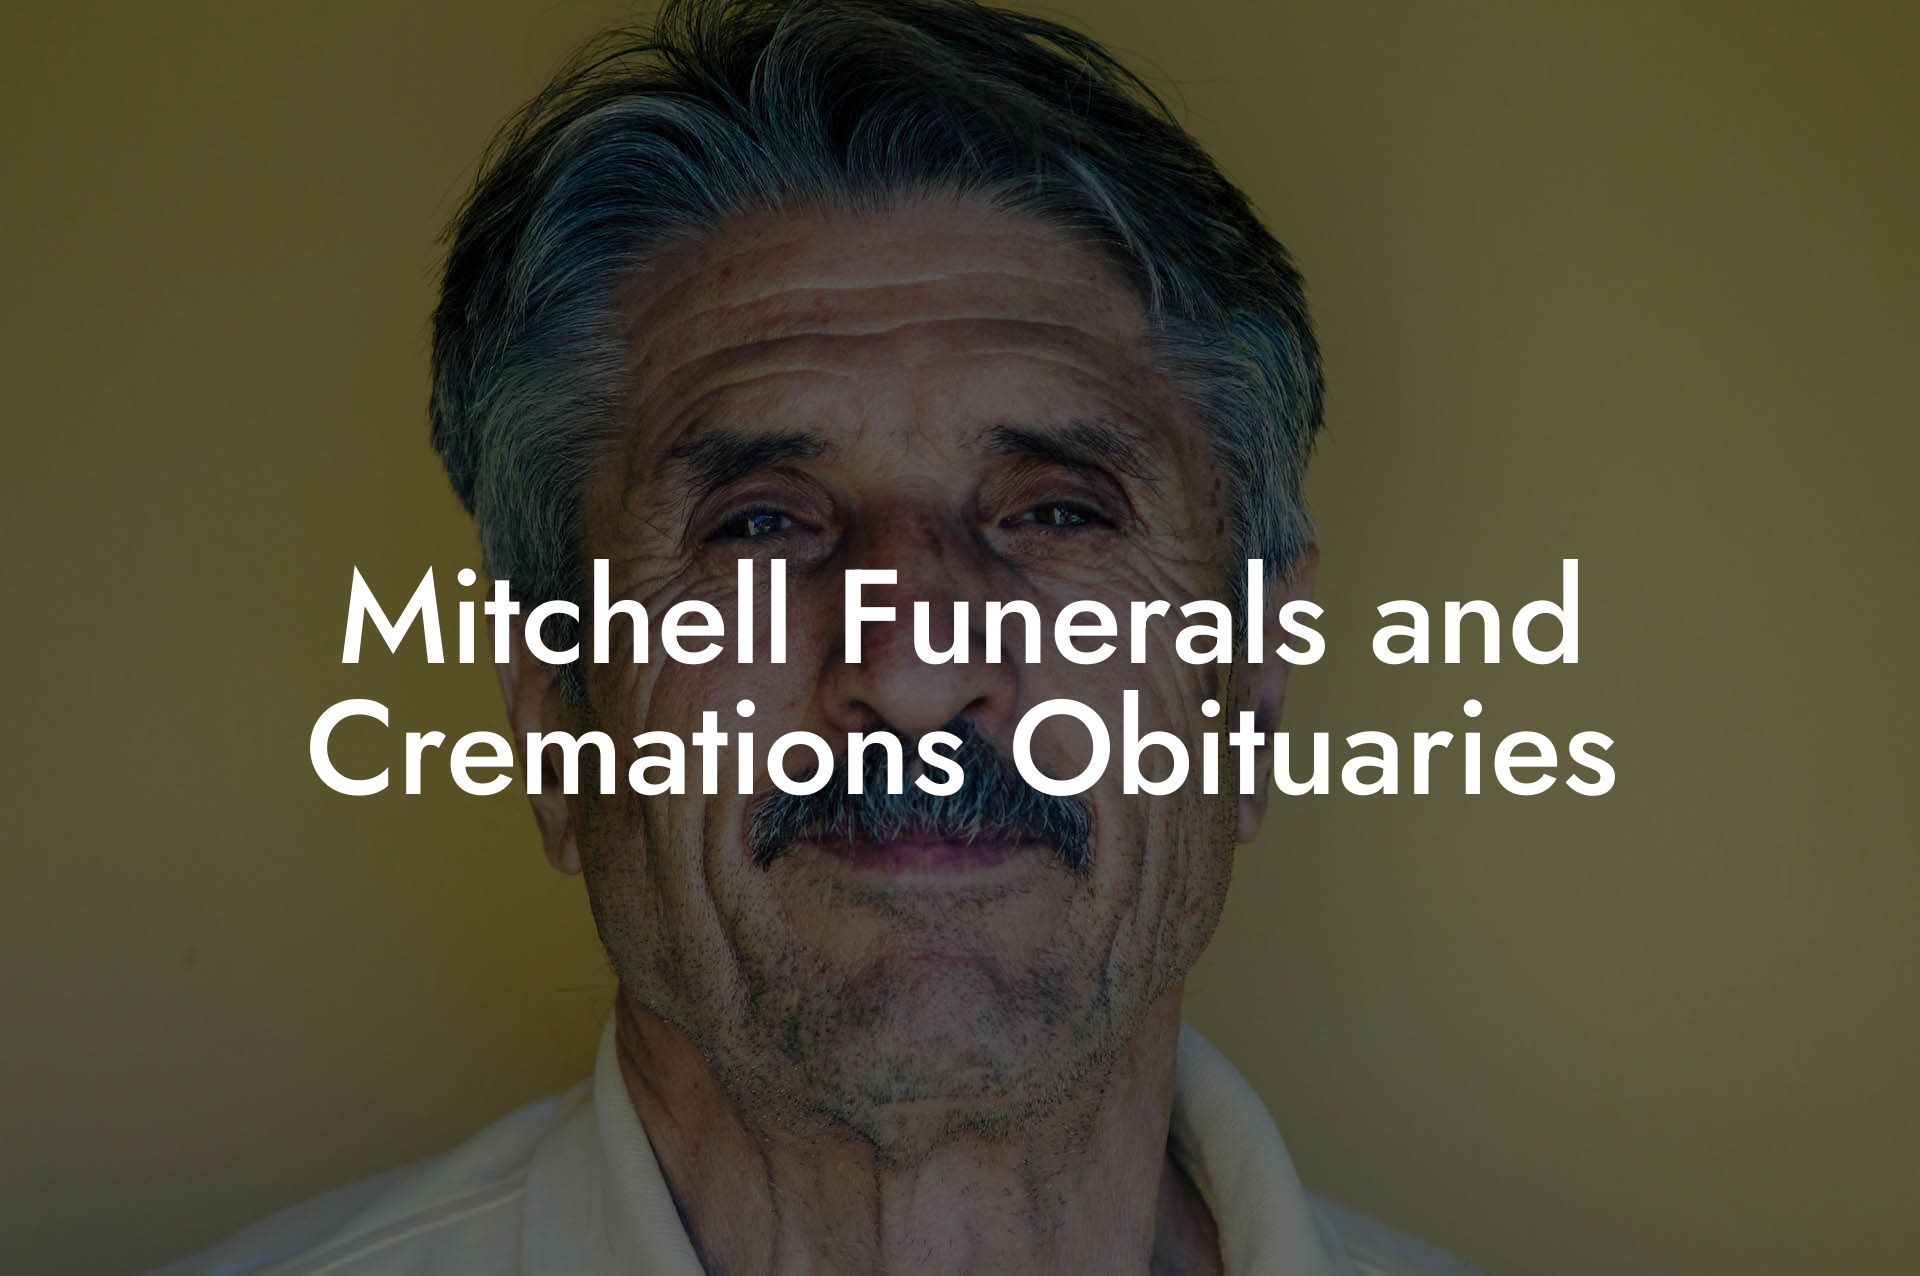 Mitchell Funerals and Cremations Obituaries